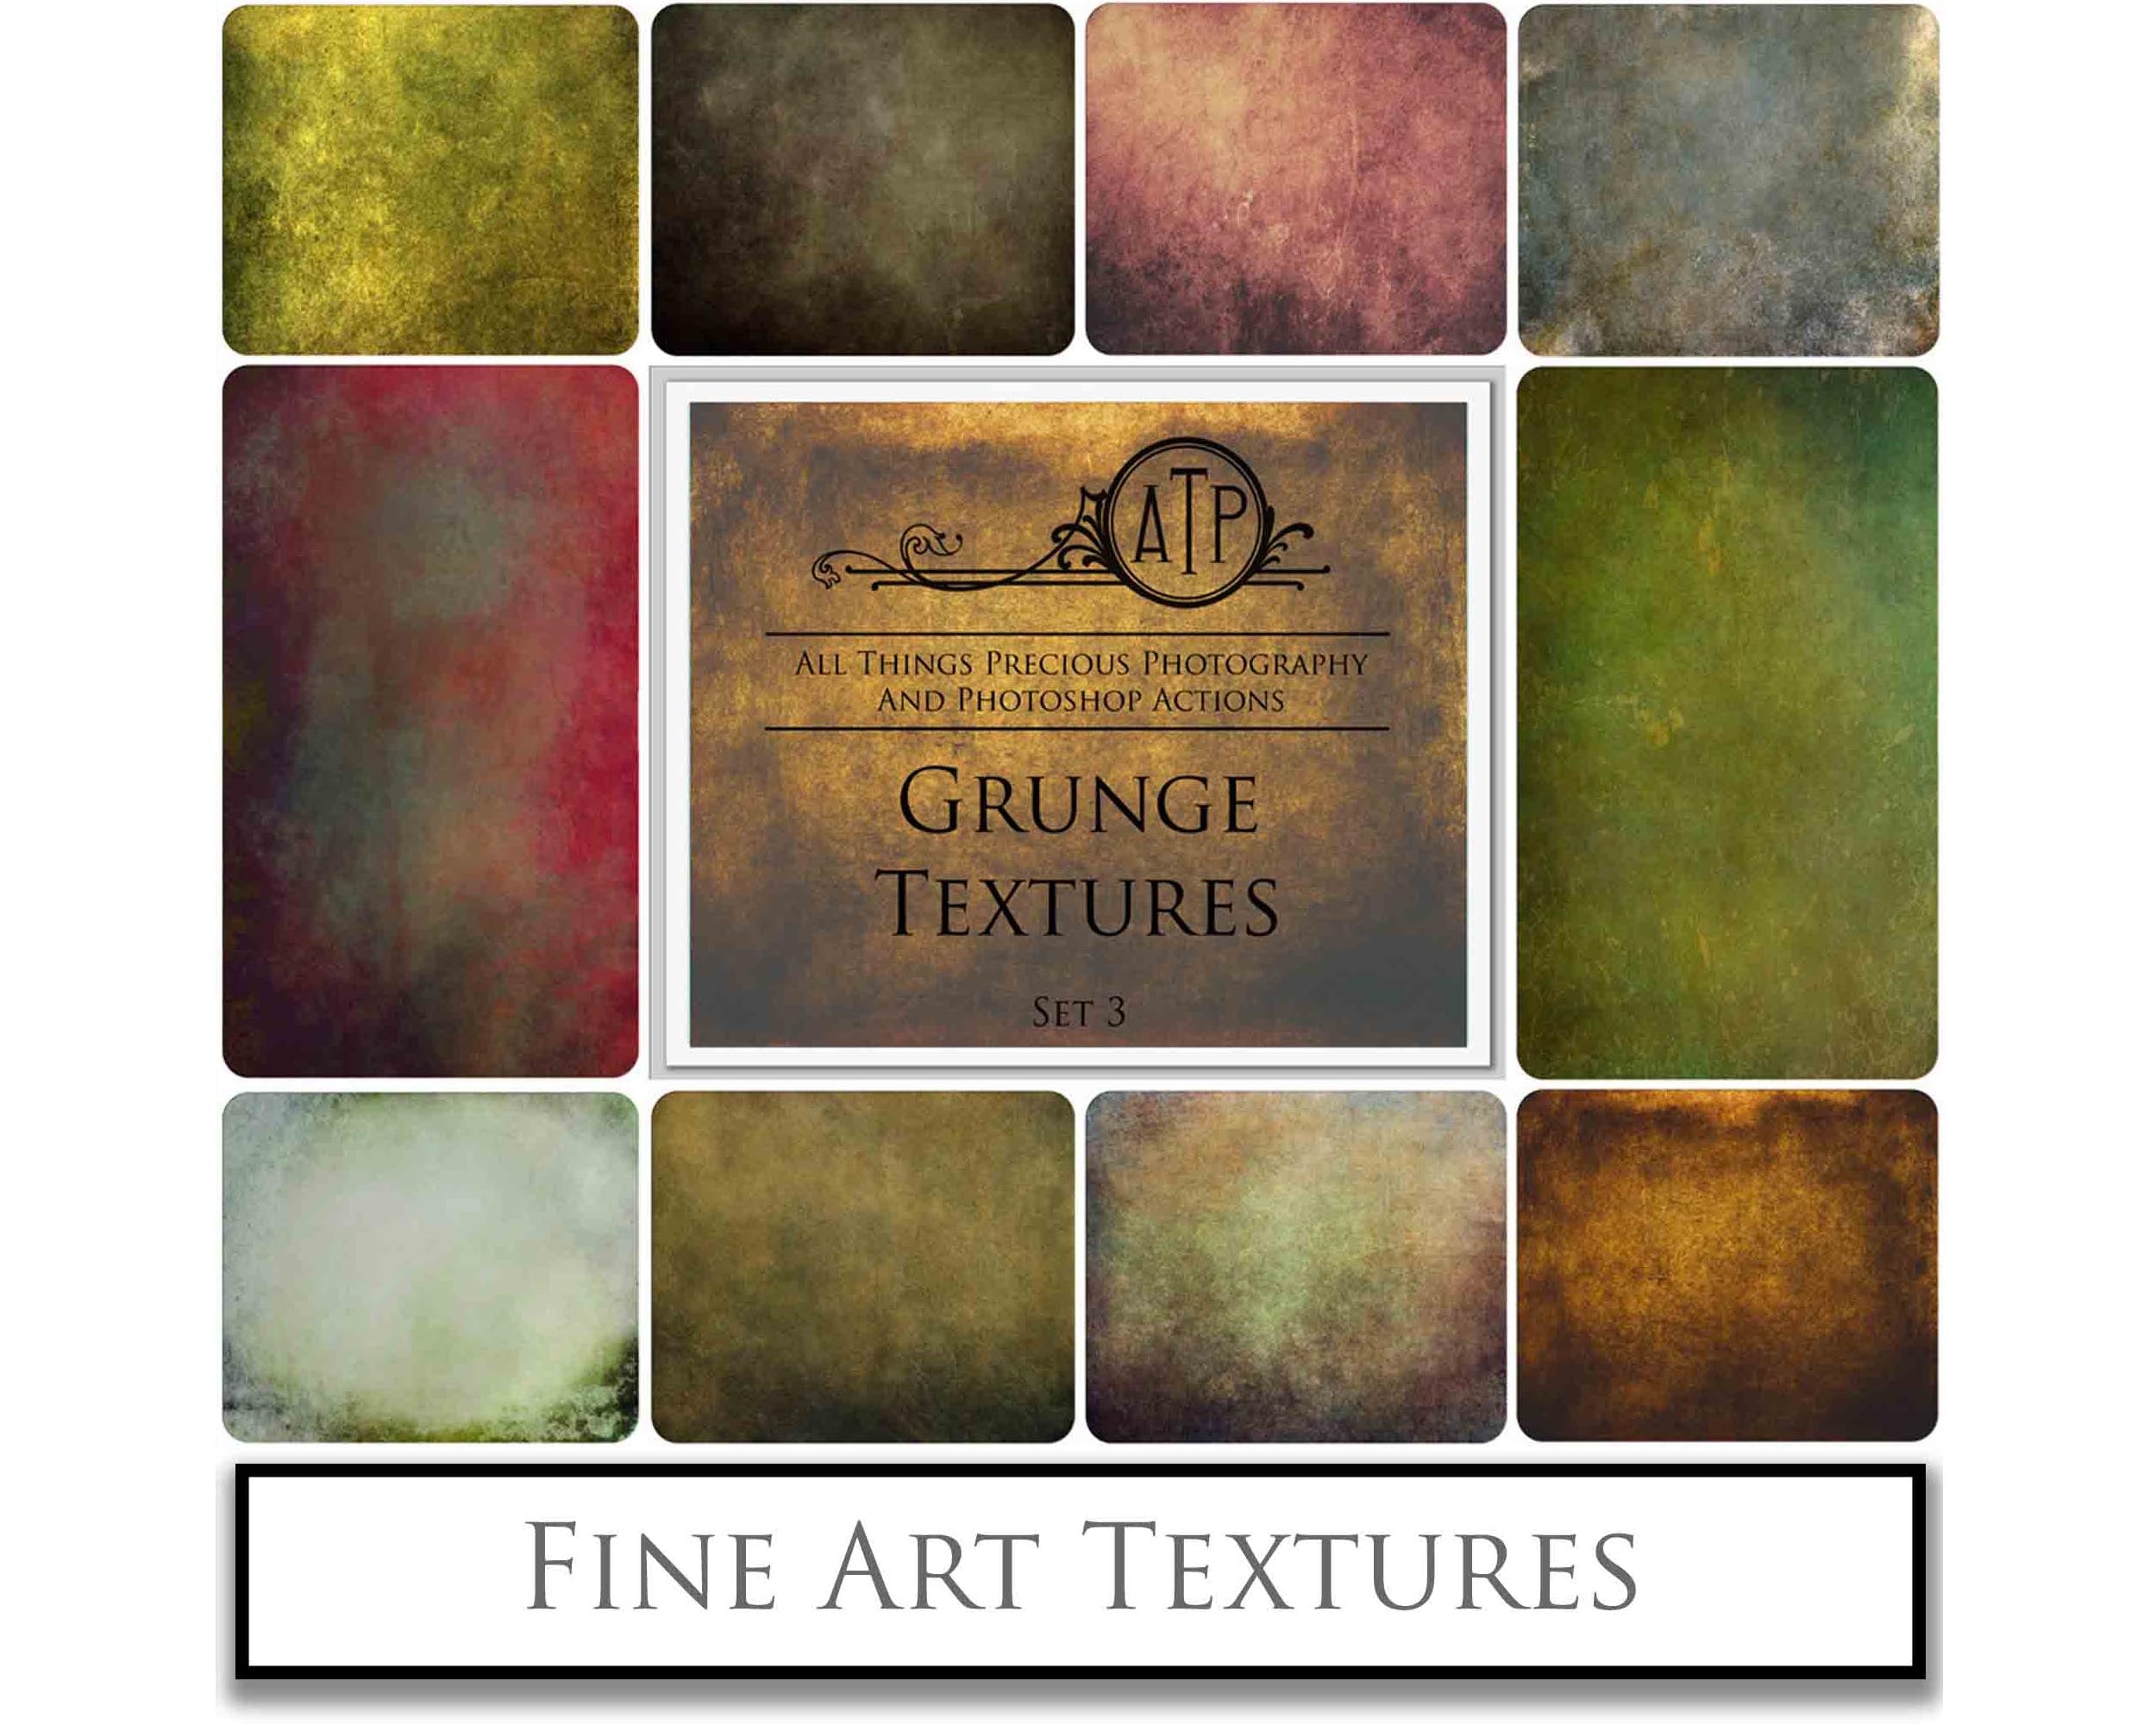 Fine art textures. Texture for photographers and digital editing. Photo Overlays. Antique, Vintage, Grunge, Light, Dark Bundle. Textured printable Canvas, Colour, Monochrome, Bundle. High resolution, 300dpi Graphic Assets for photography, digital scrapbooking and design. By ATP Textures